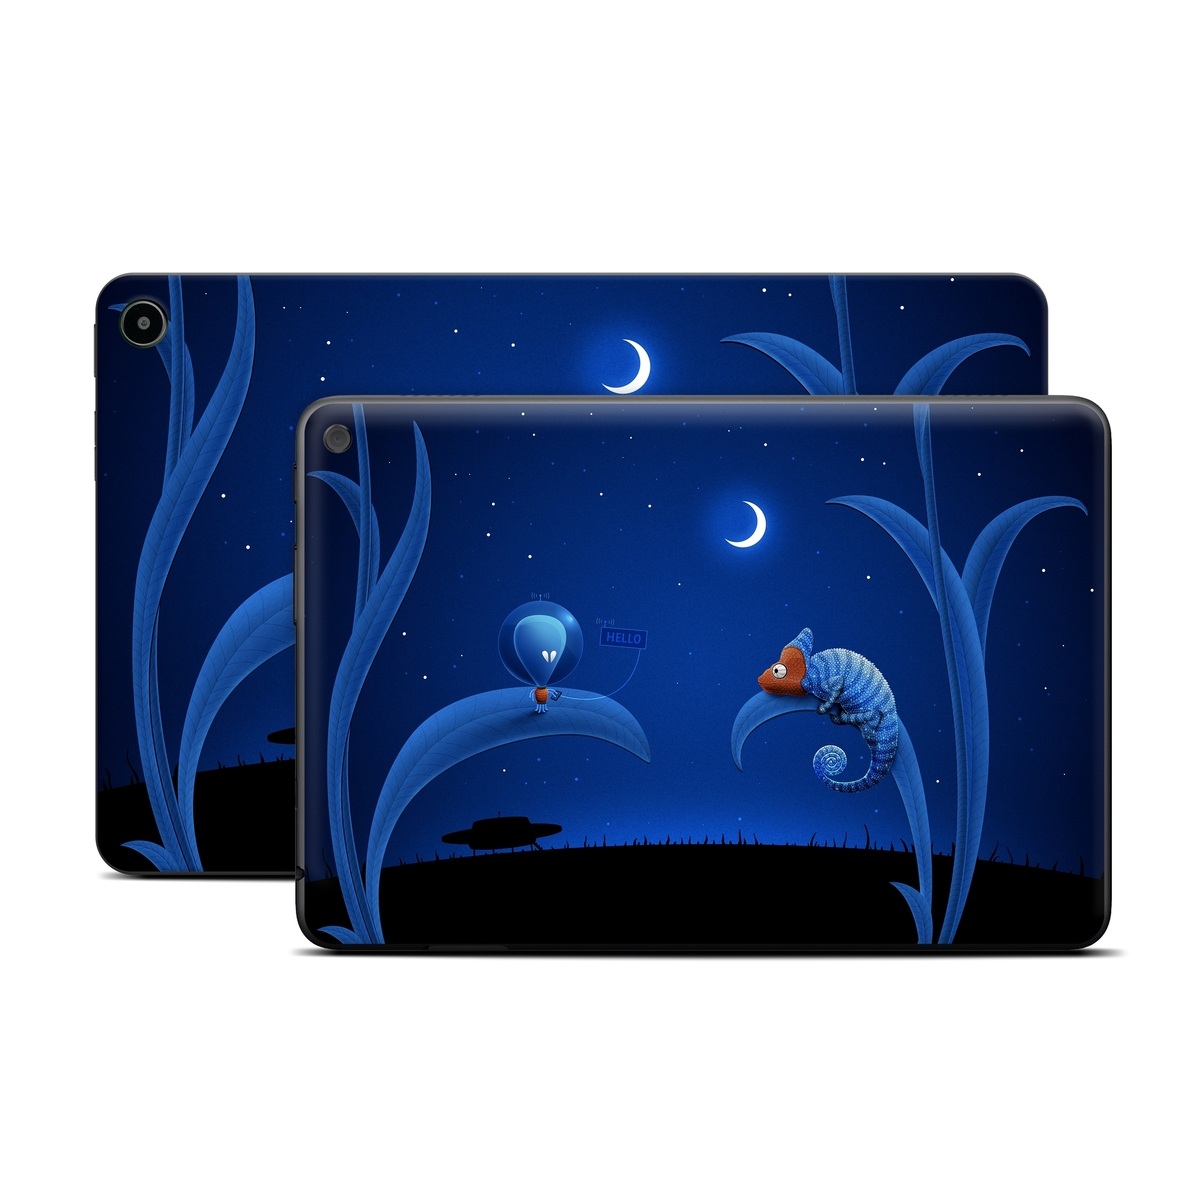 Amazon Fire Tablet Series Skin Skin design of Organism, Astronomical object, Space, Illustration, Night, Graphics, with black, blue, orange colors